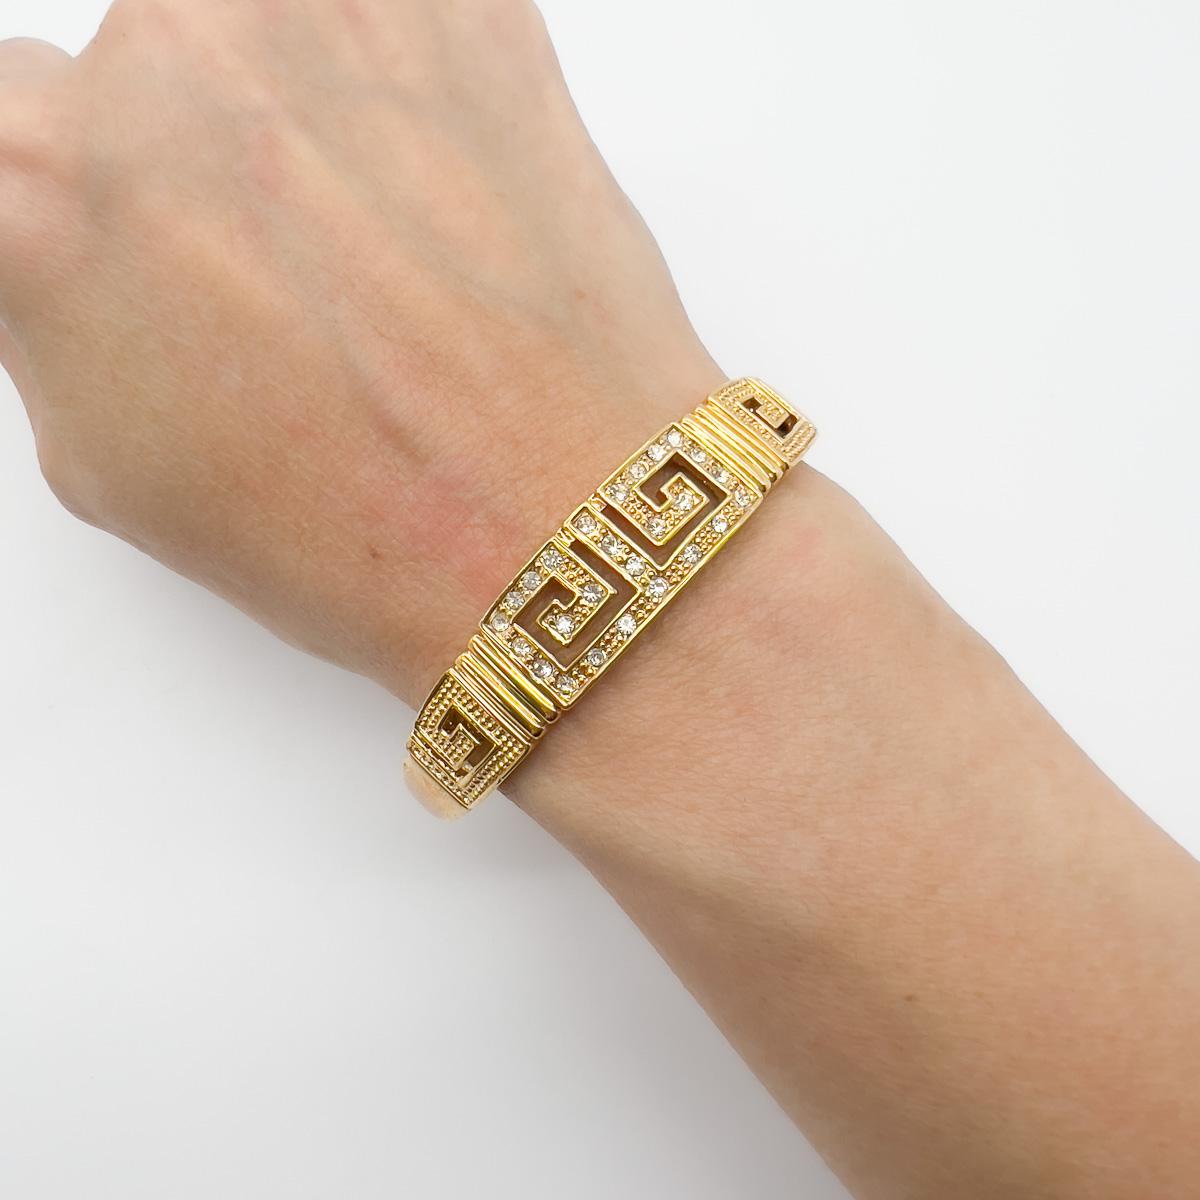 A Vintage Greek Key Bracelet. Eternally stylish and the perfect jewel capsule piece.
An unsigned beauty. A rare treasure. Just because a jewel doesn’t carry a designer name, doesn’t mean it isn't coveted. The unsigned beauties in our collection are